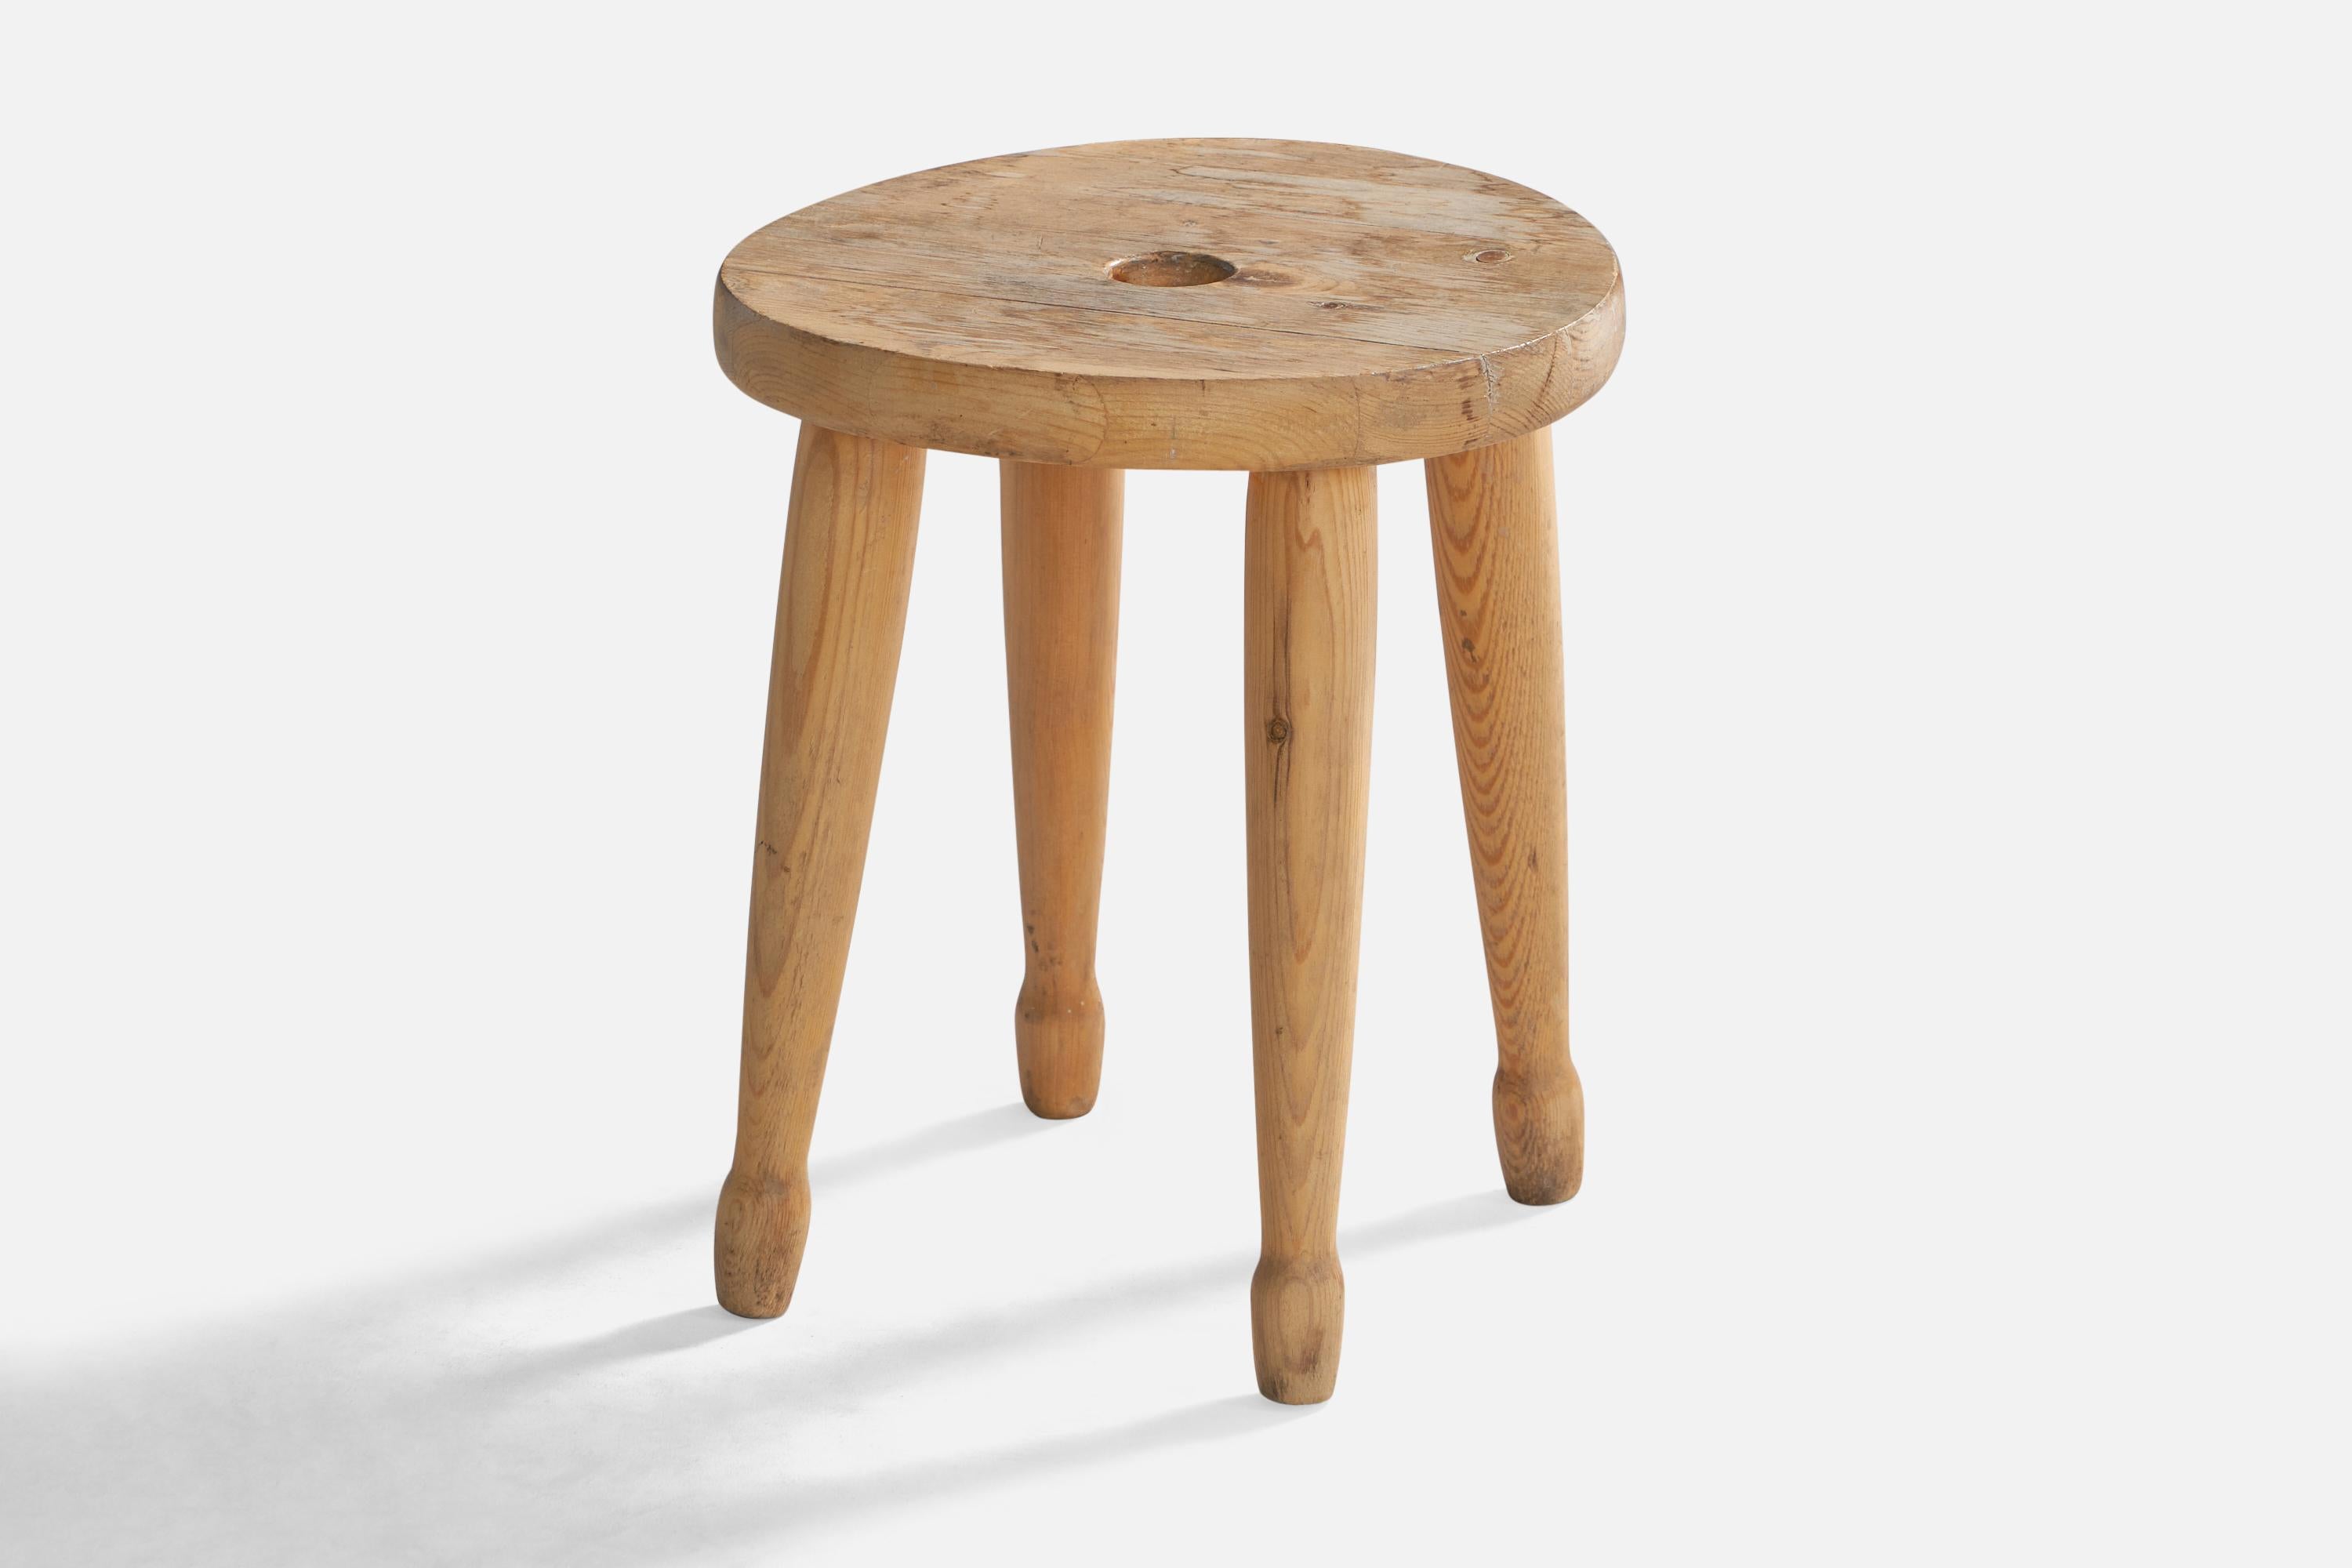 A pine stool designed and produced in Sweden, c. 1960s.

Seat height: 13.75”